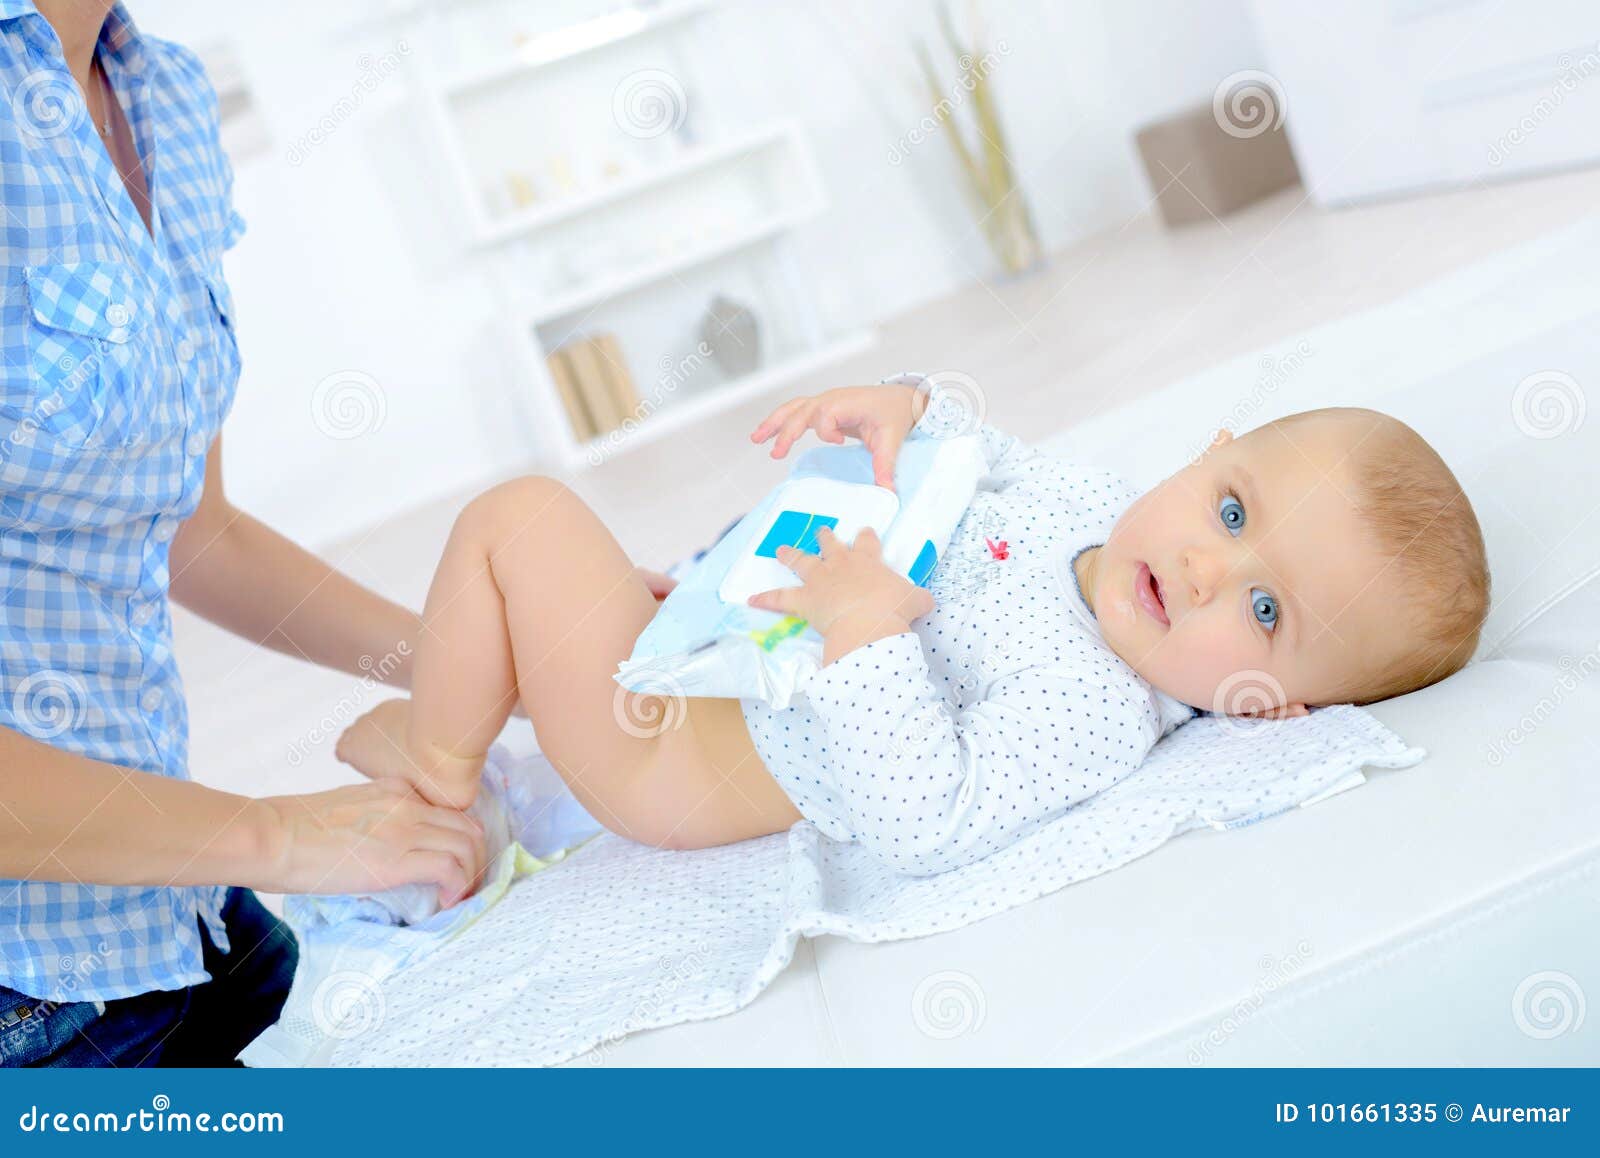 Woman Changing Babys Diaper Stock Image - Image of clean ...